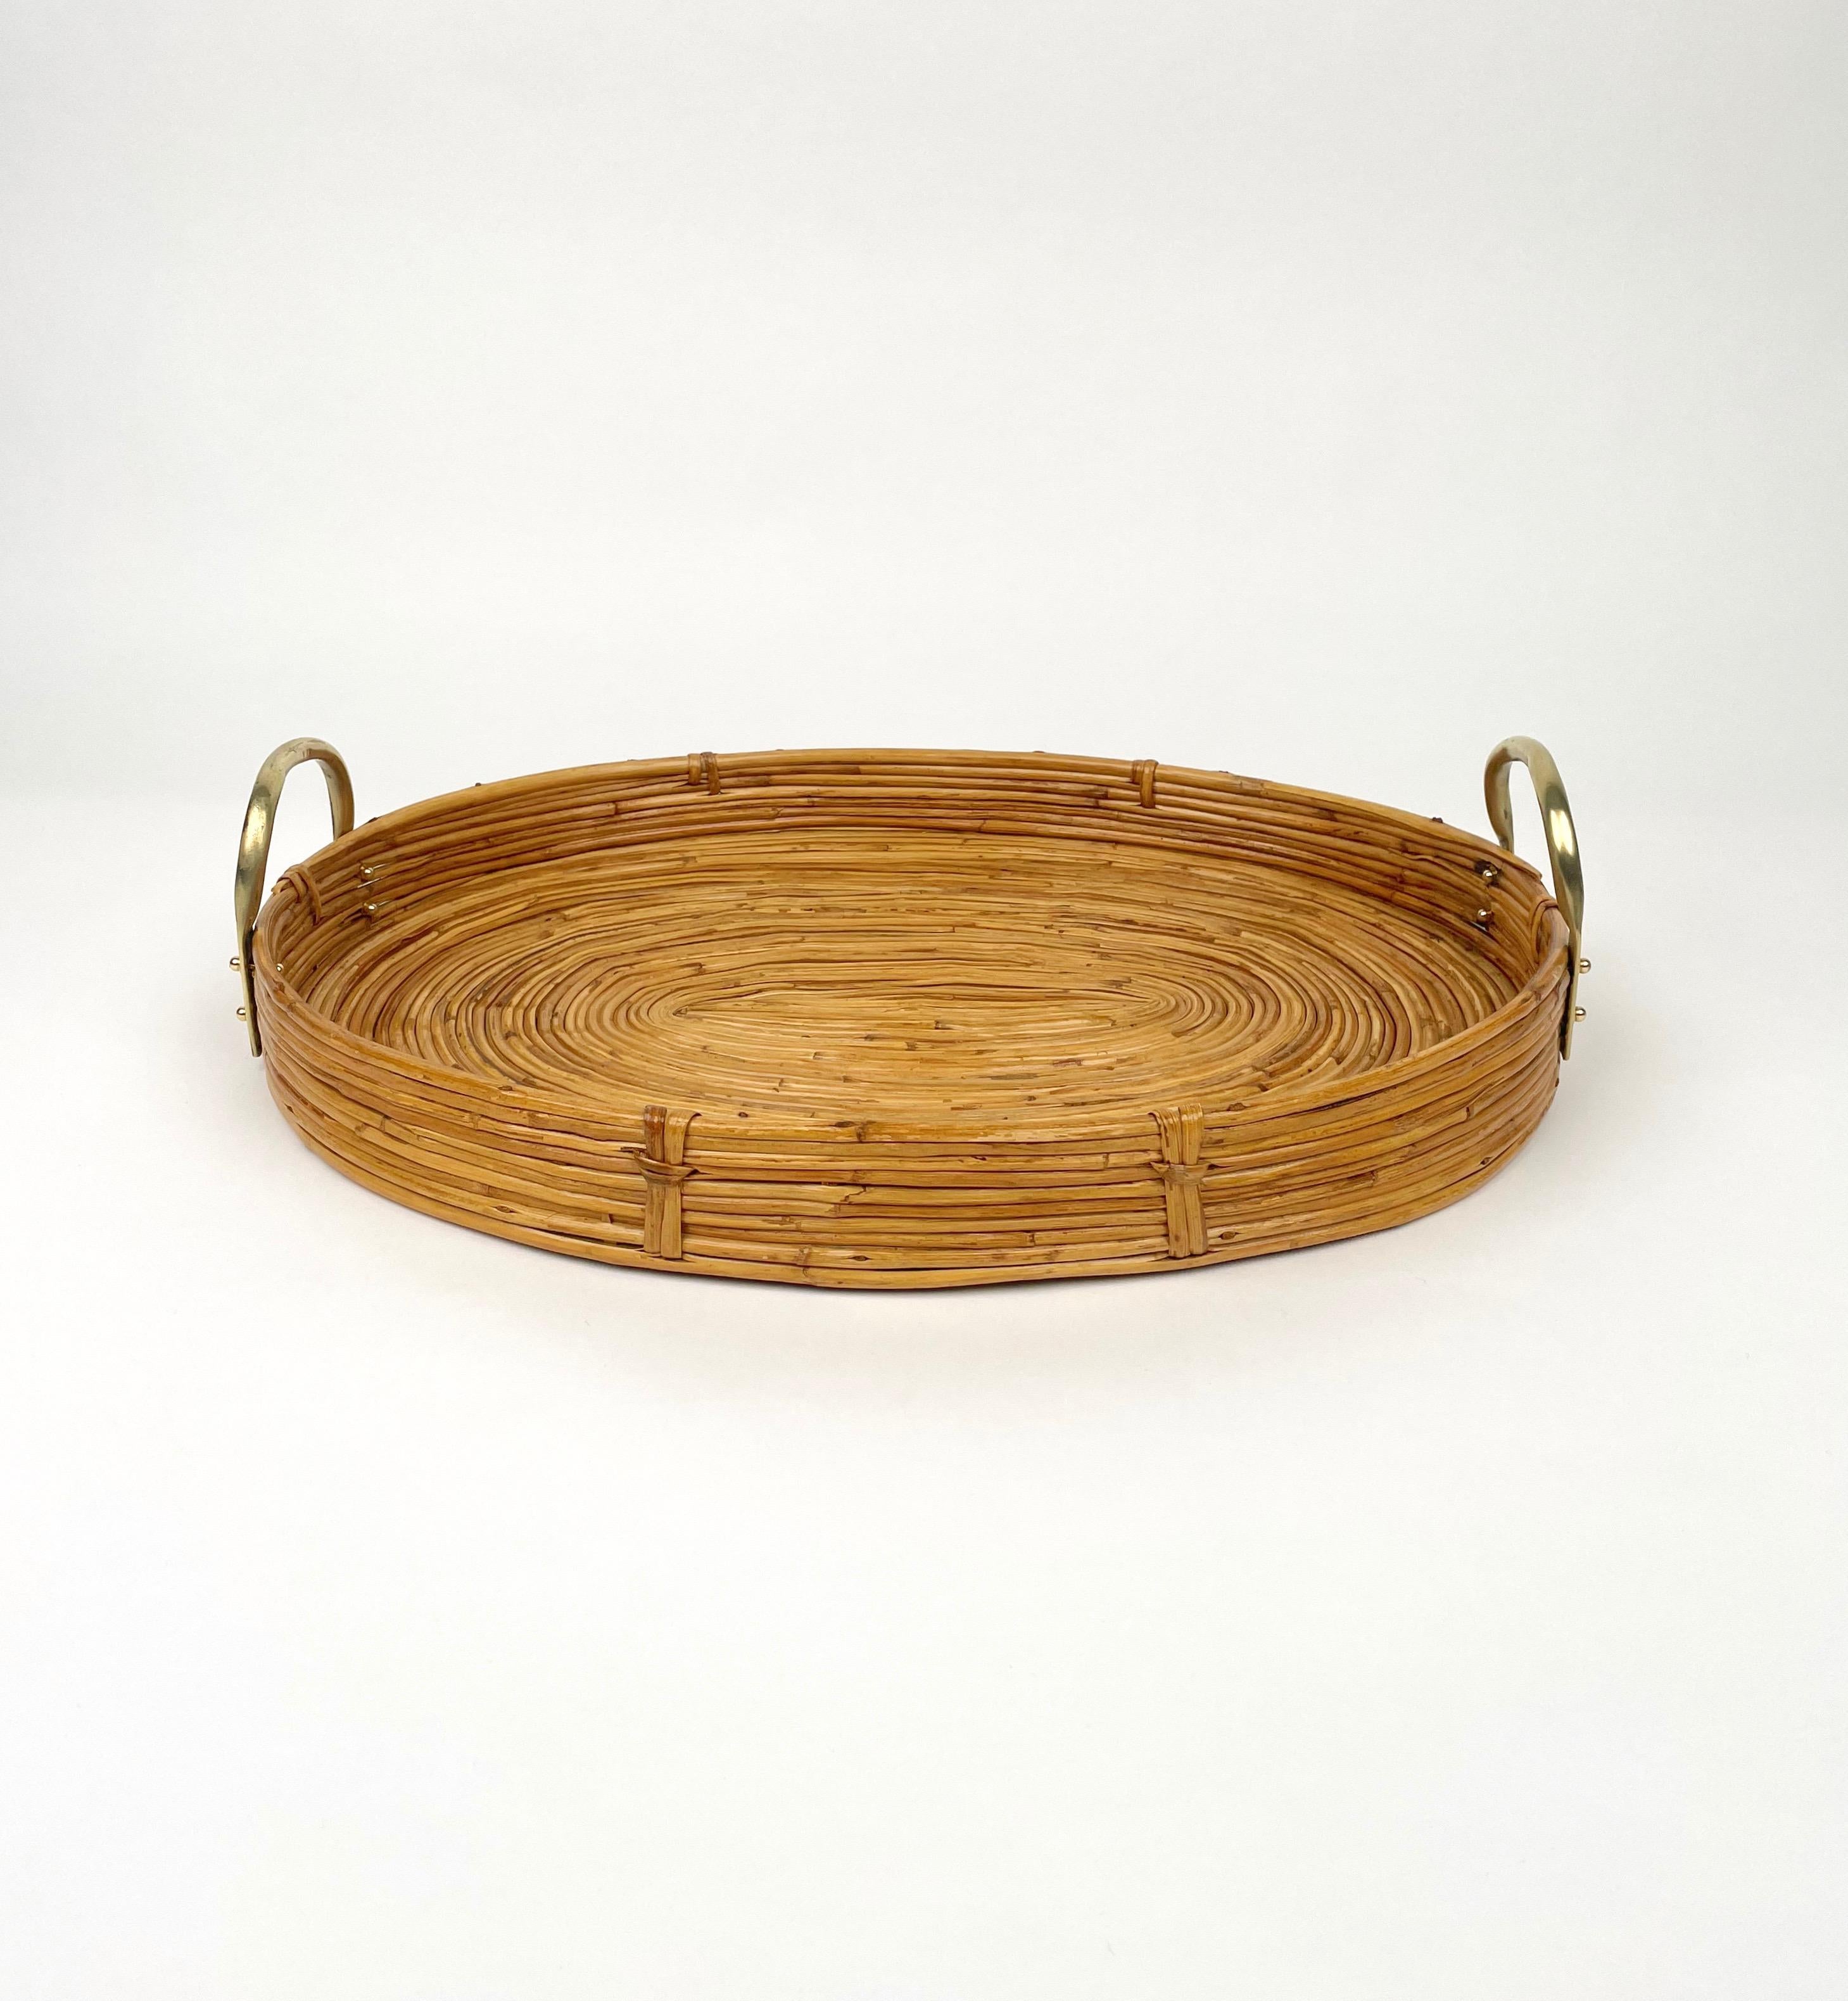 Beautiful 1970s Italian Mid-Century Modern serving cocktail bar tray with polished brass handles . Made of rattan and bamboo, this charming piece is in the typical style where the organic beauty of the woven materials is timeless and classic, making